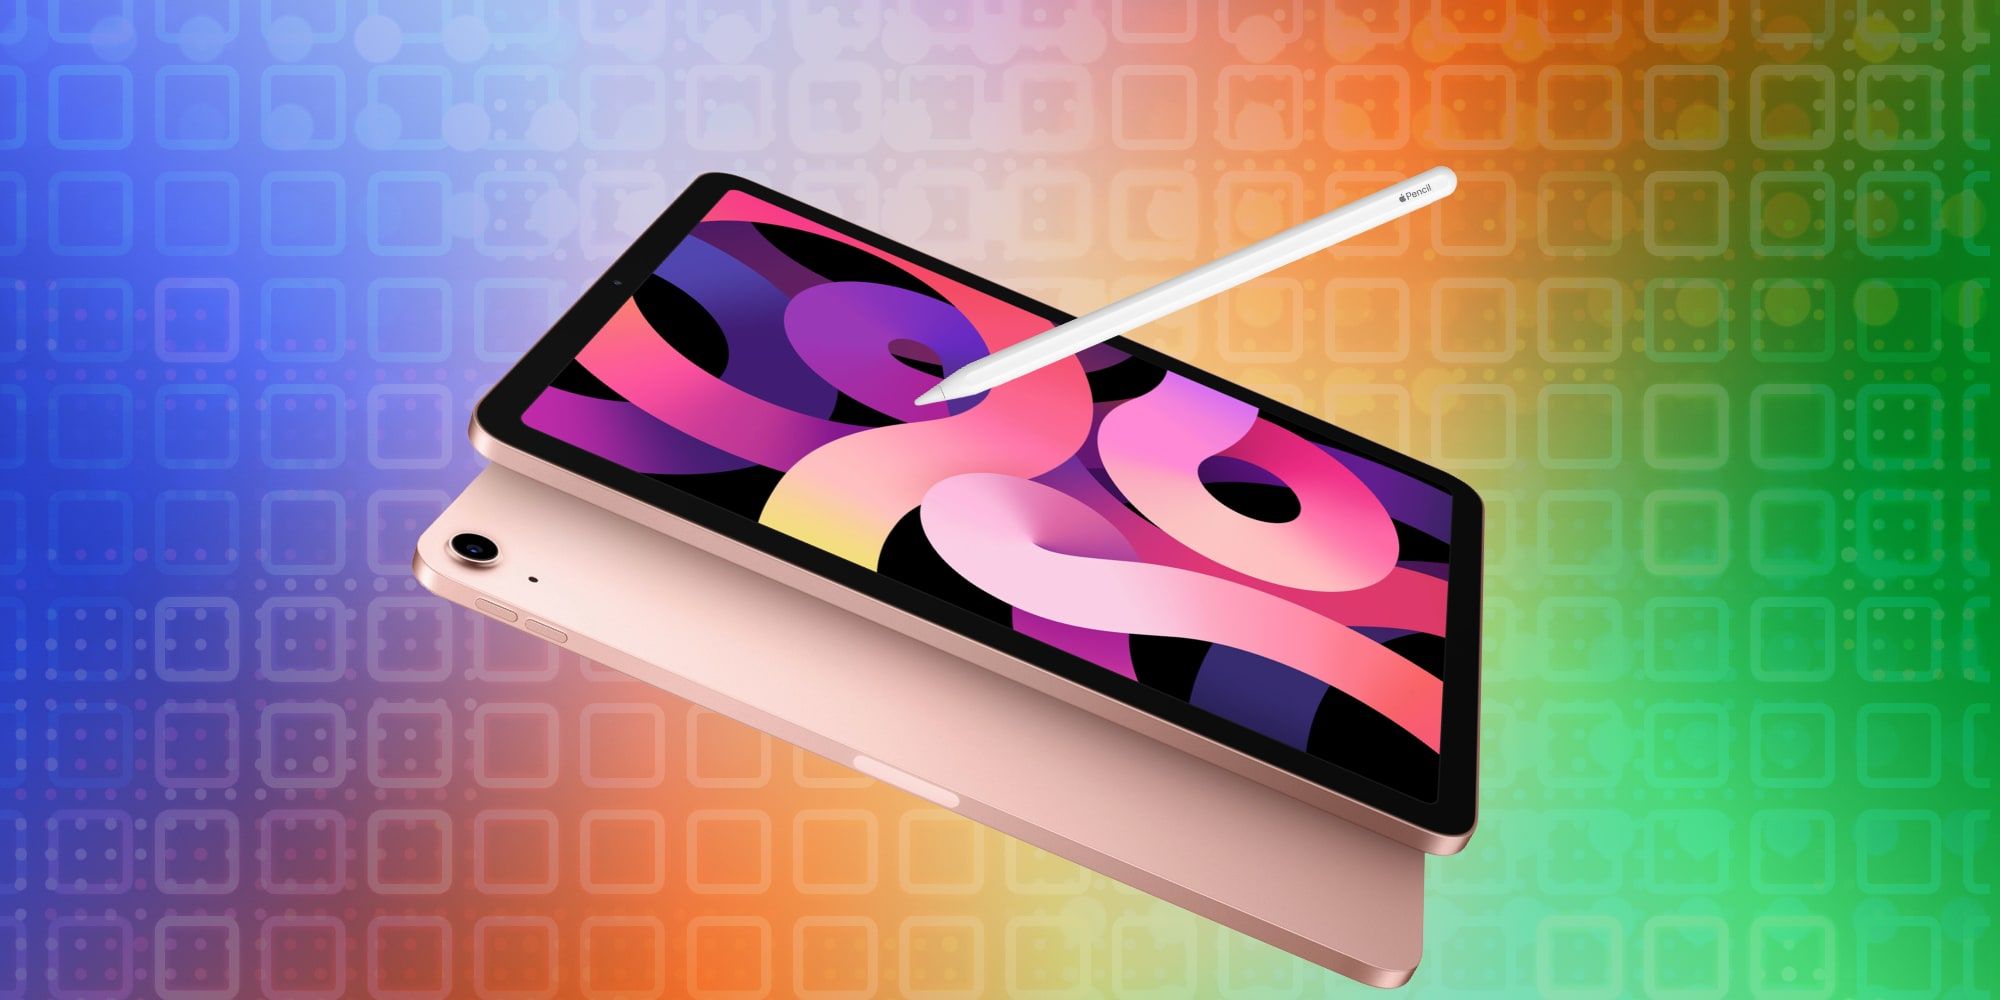 How To Fix Apple Pencil When It Stops Working